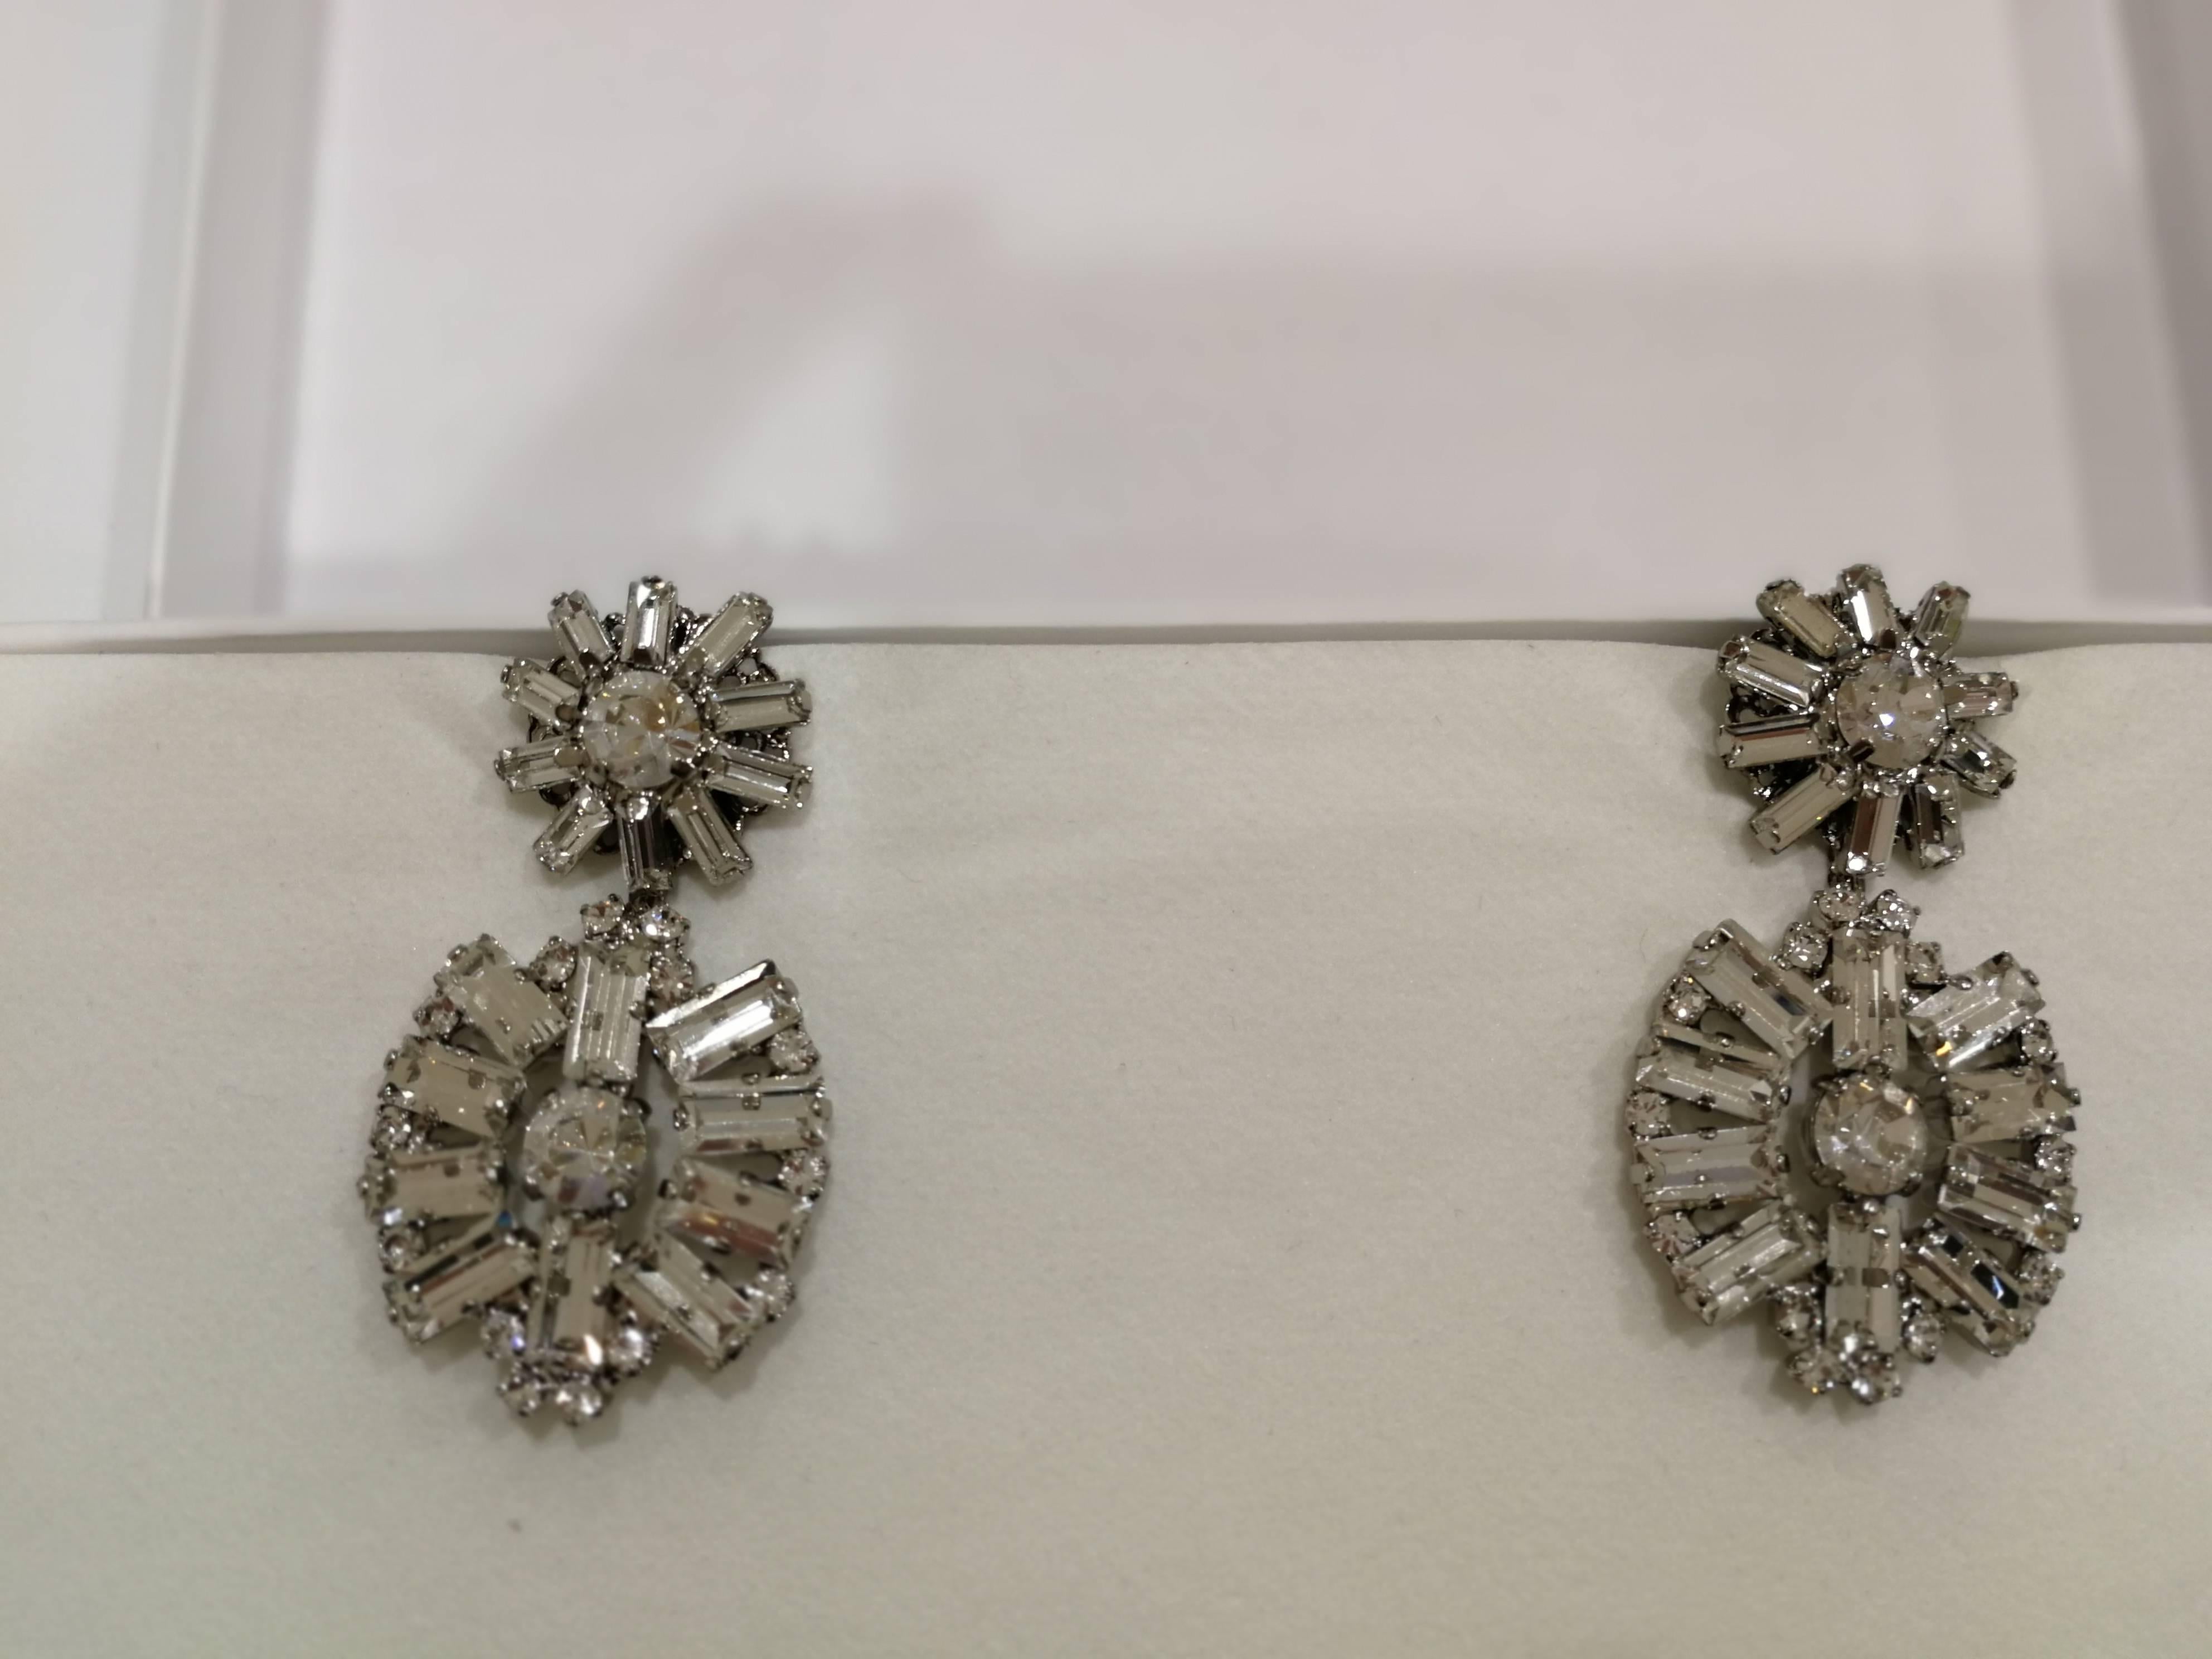 Lisa C. Crystal Swarovski pendant earrings

Totally made in italy

measurements: 
total lenght 6 cm
2.5 cm up to 3 cm widht 